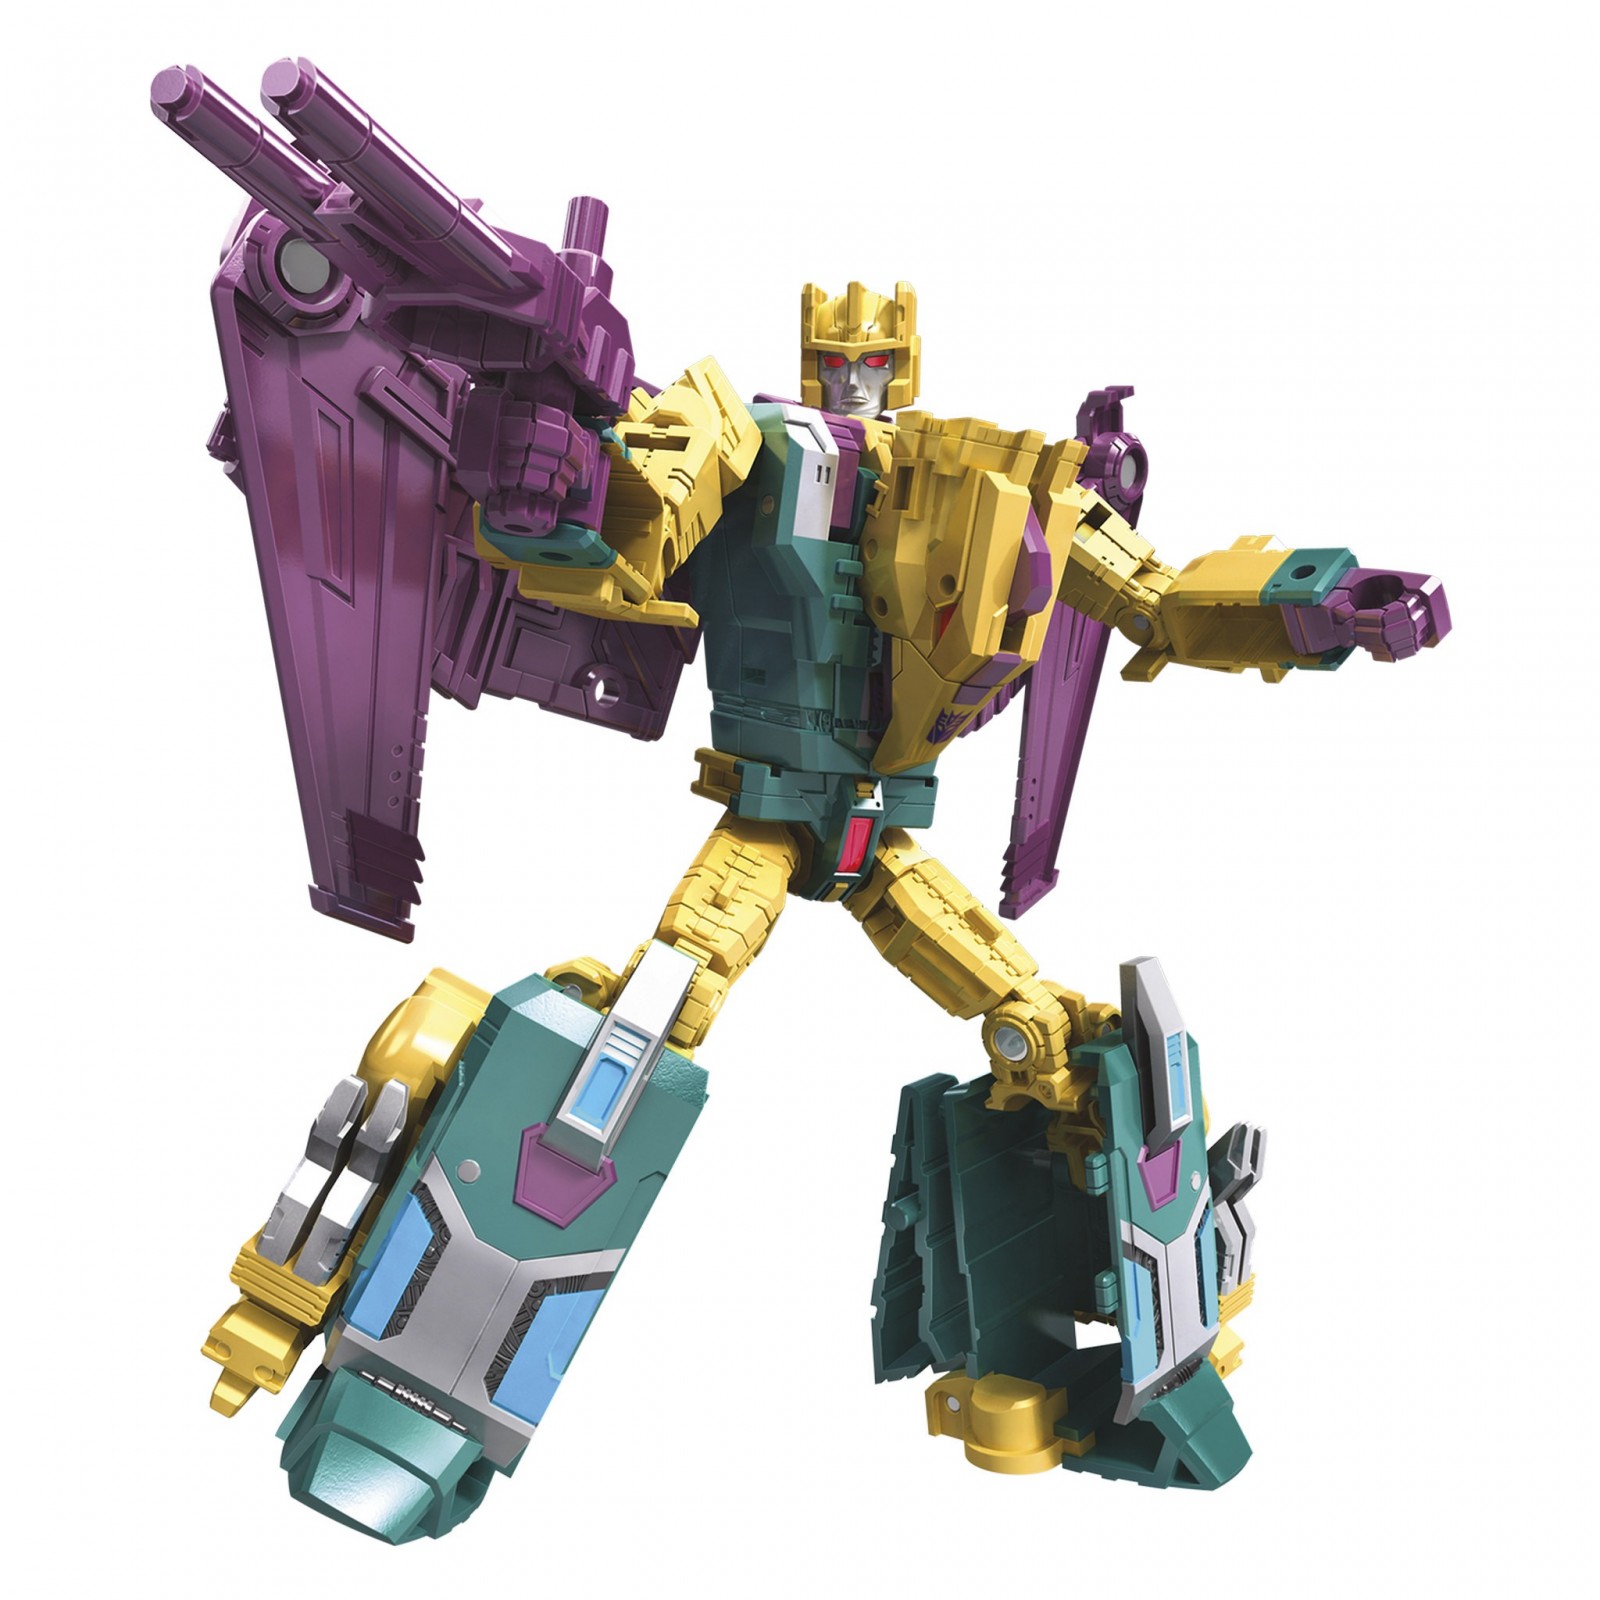 Transformers News: Official Bios and Images for #Transformers Power of the Primes Revealed at NYCC 2017 #hasbronycc